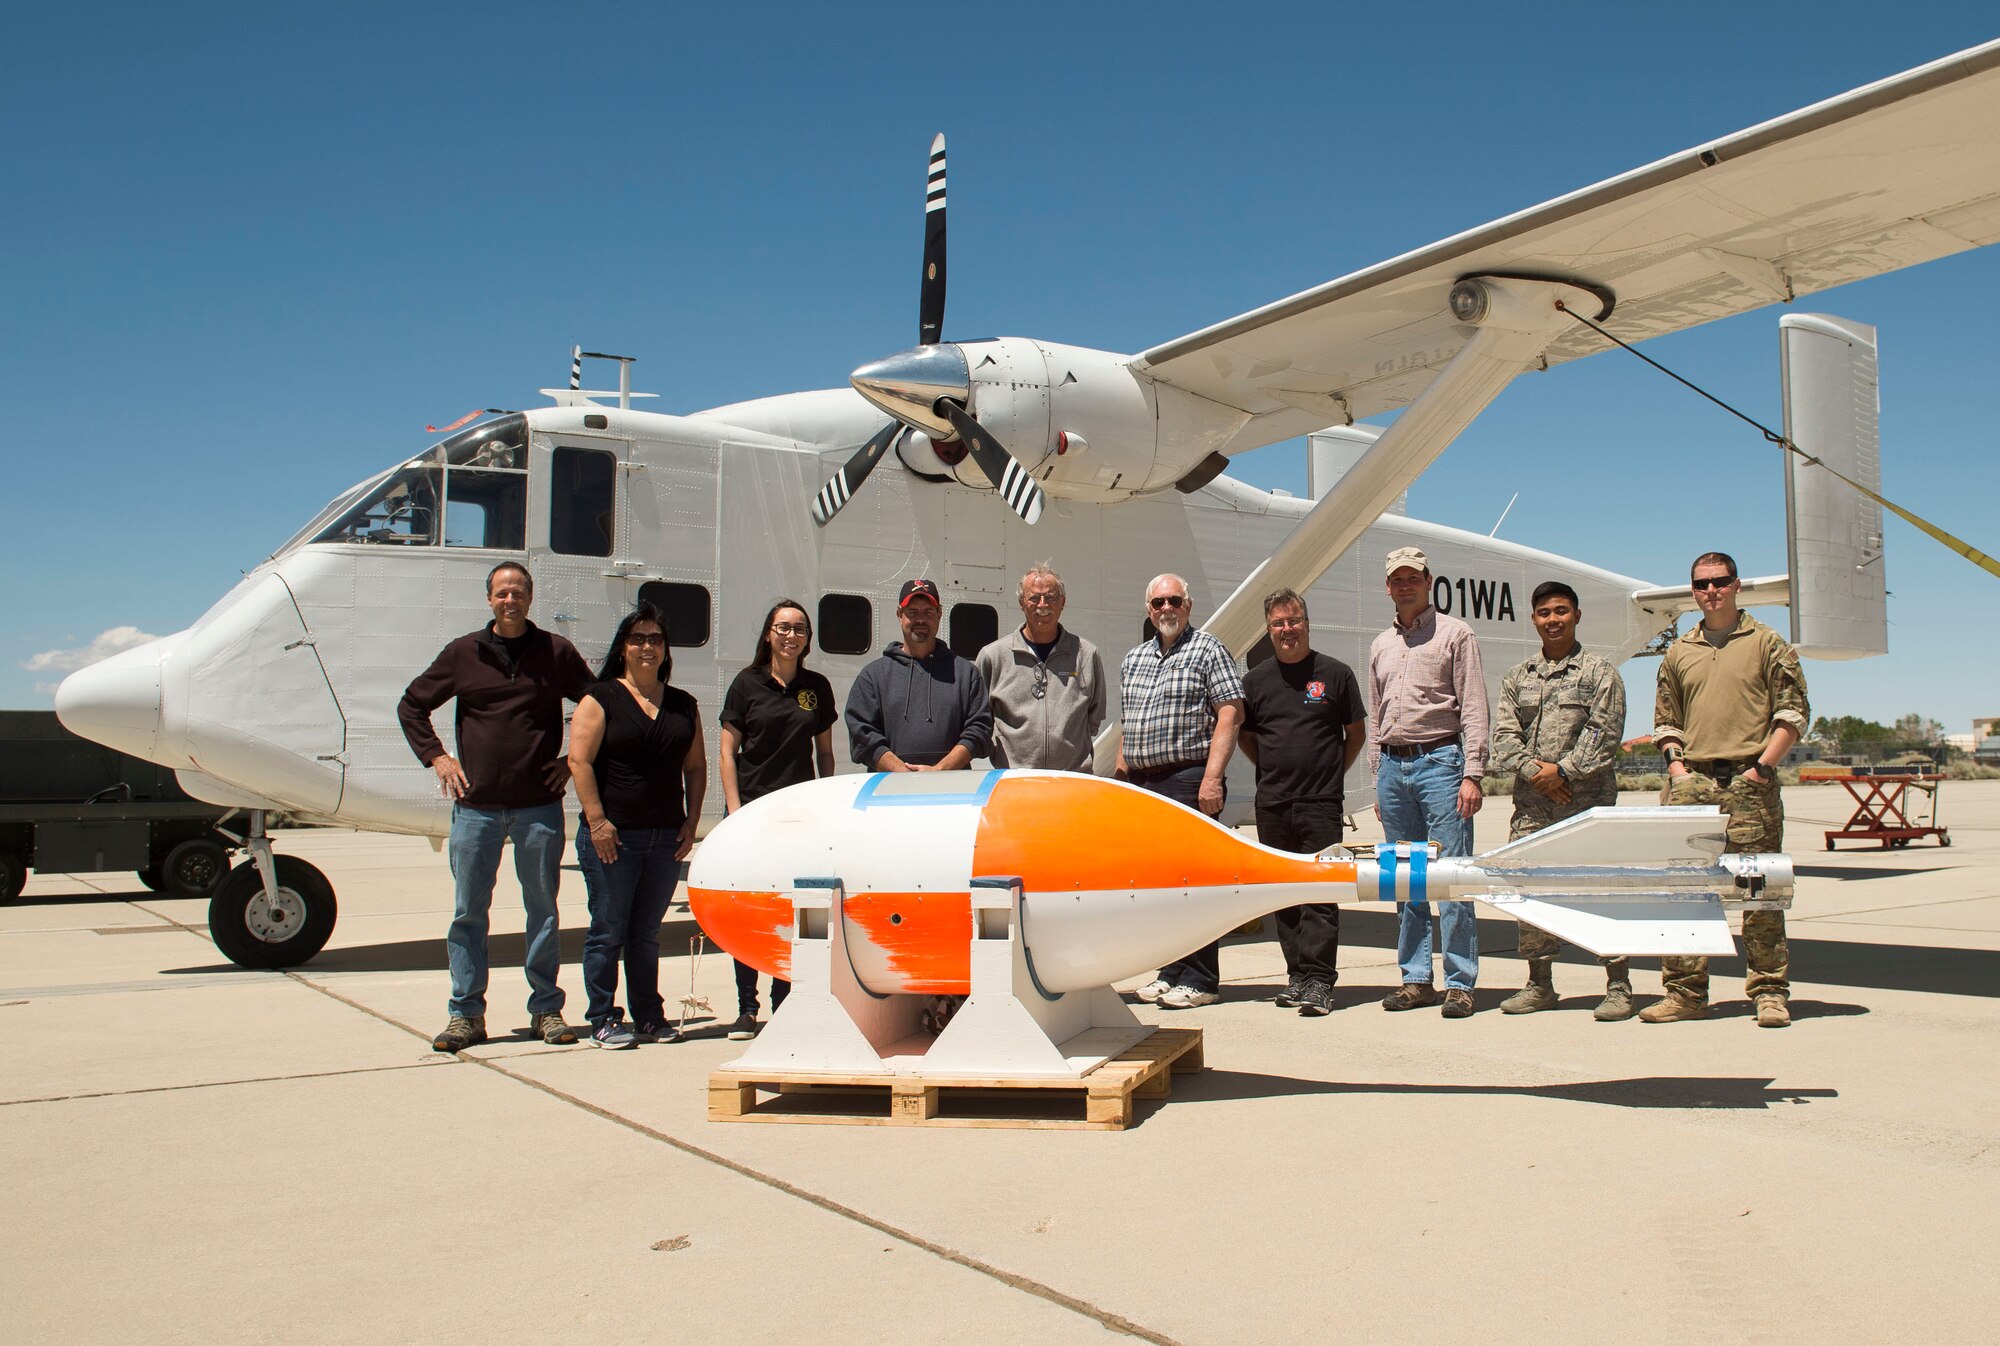 Some of the members of the 418th Flight Test Squadron pose in front of the Skydive Perris Skyvan aircraft used in testing of the GR7000 parachute along with a crosswind deployment cylindrical test vehicle (foreground) that was also used. (U.S. Air Force photo by Ethan Wagner)